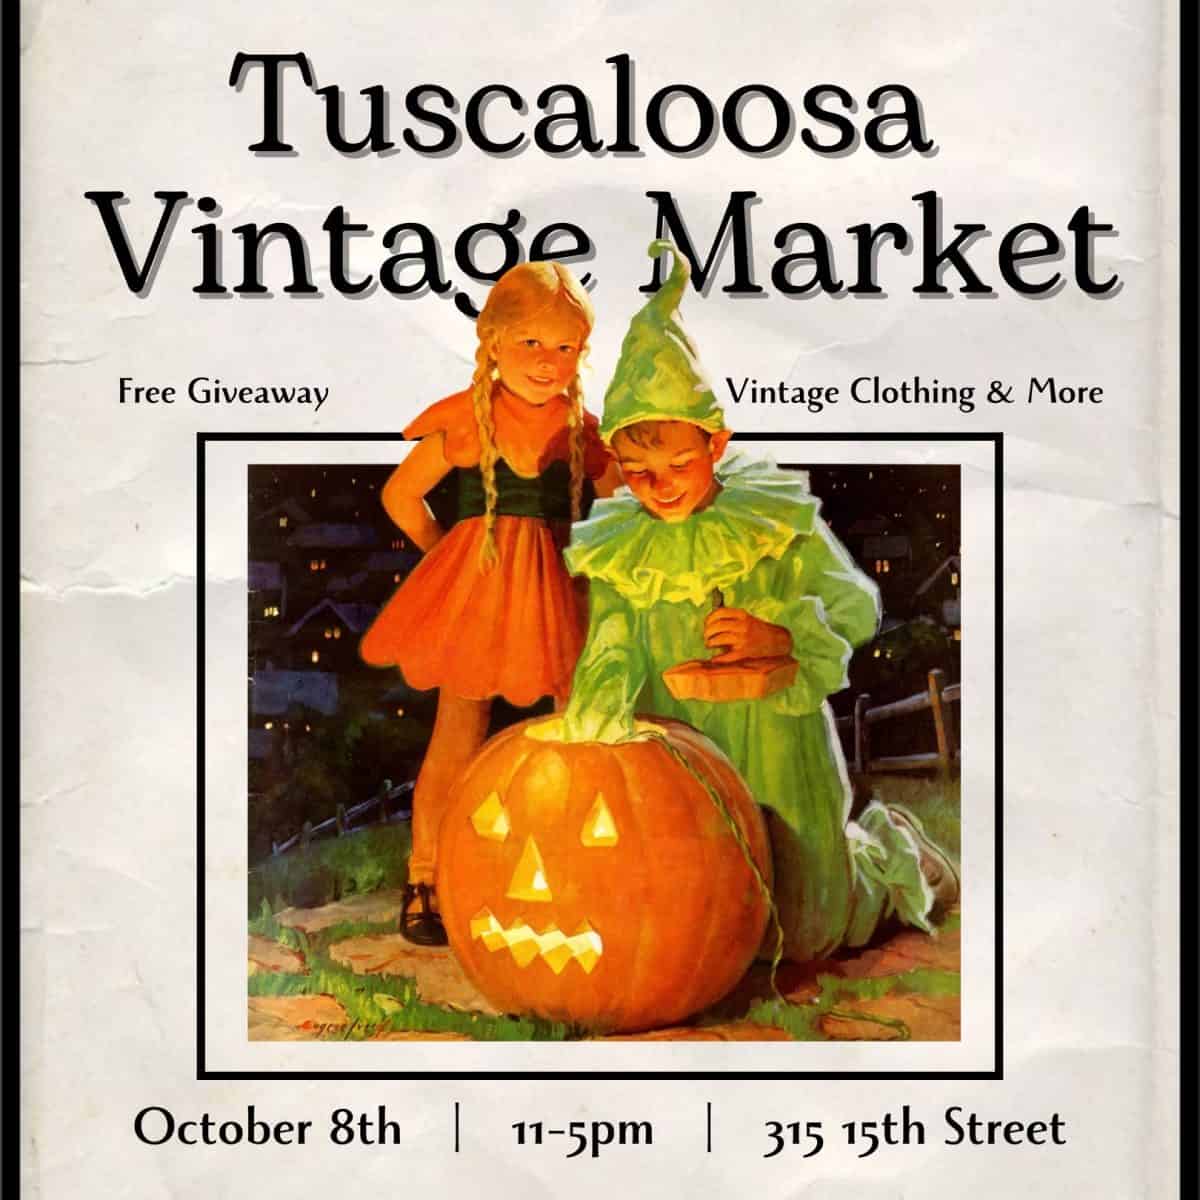 Tuscaloosa Vintage Market offers a sustainable way to shop